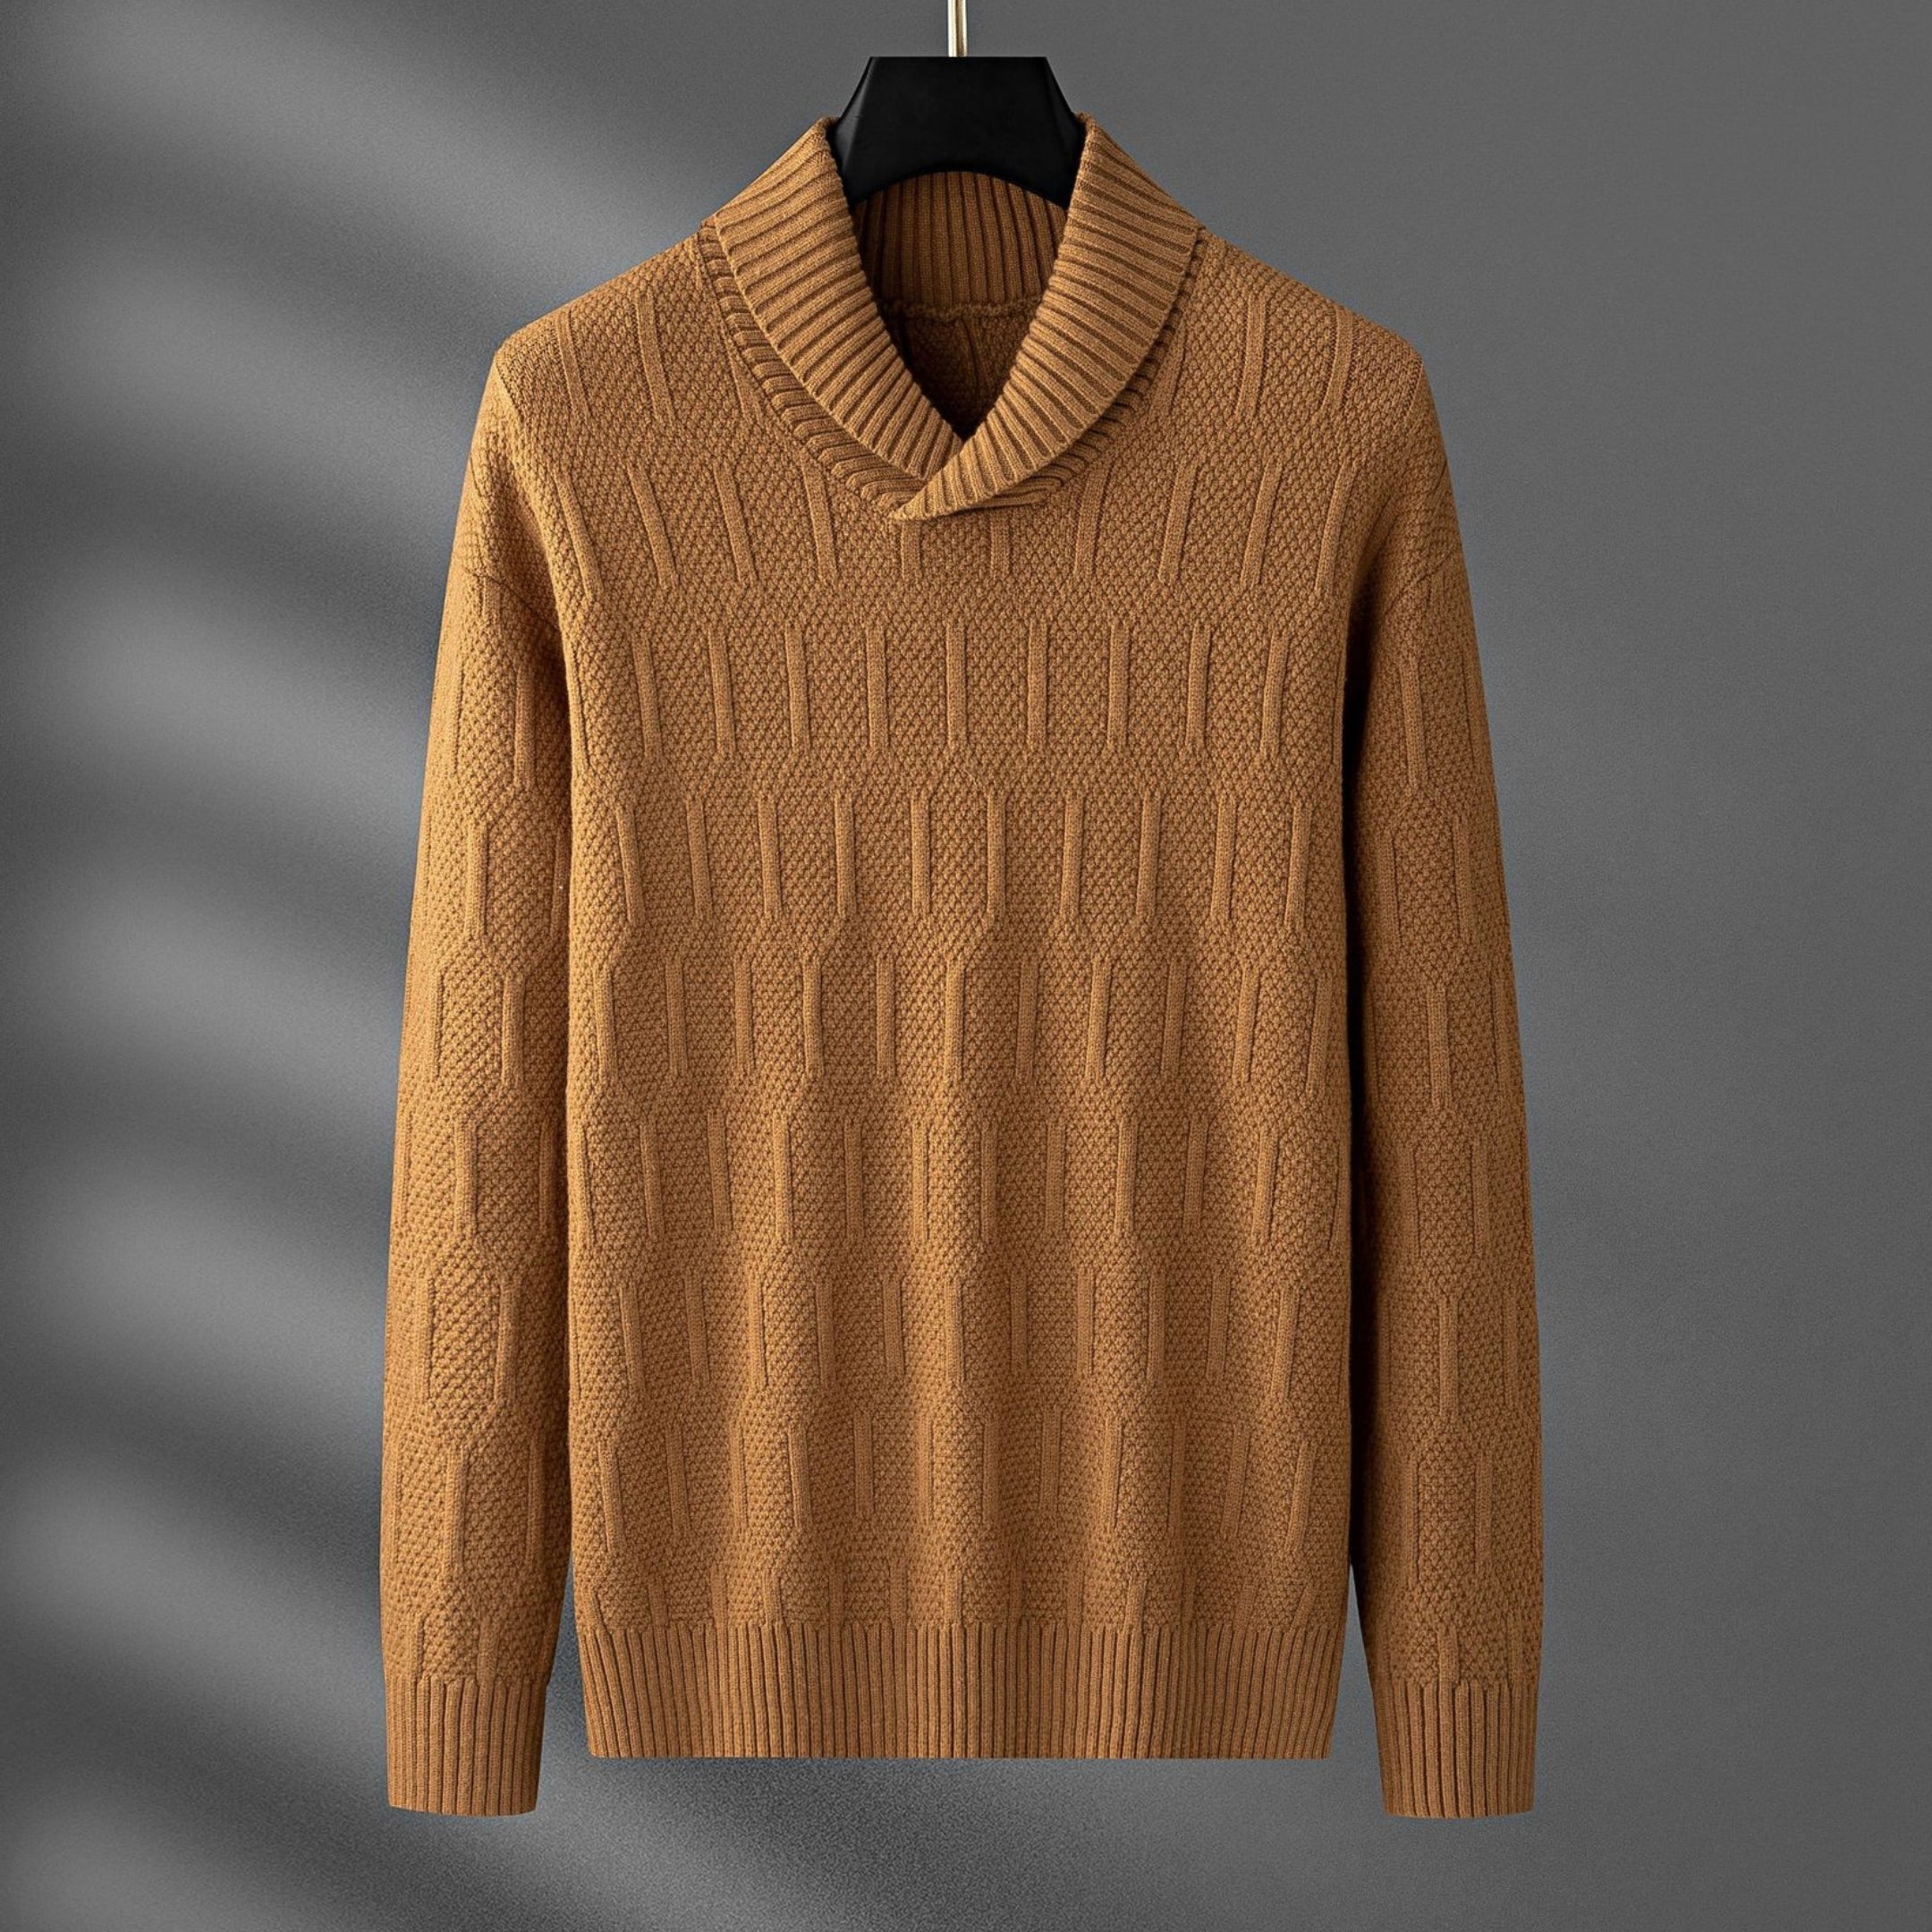 REMY-SINCLAIRE 100% VIRGIN WOOL SWEATER